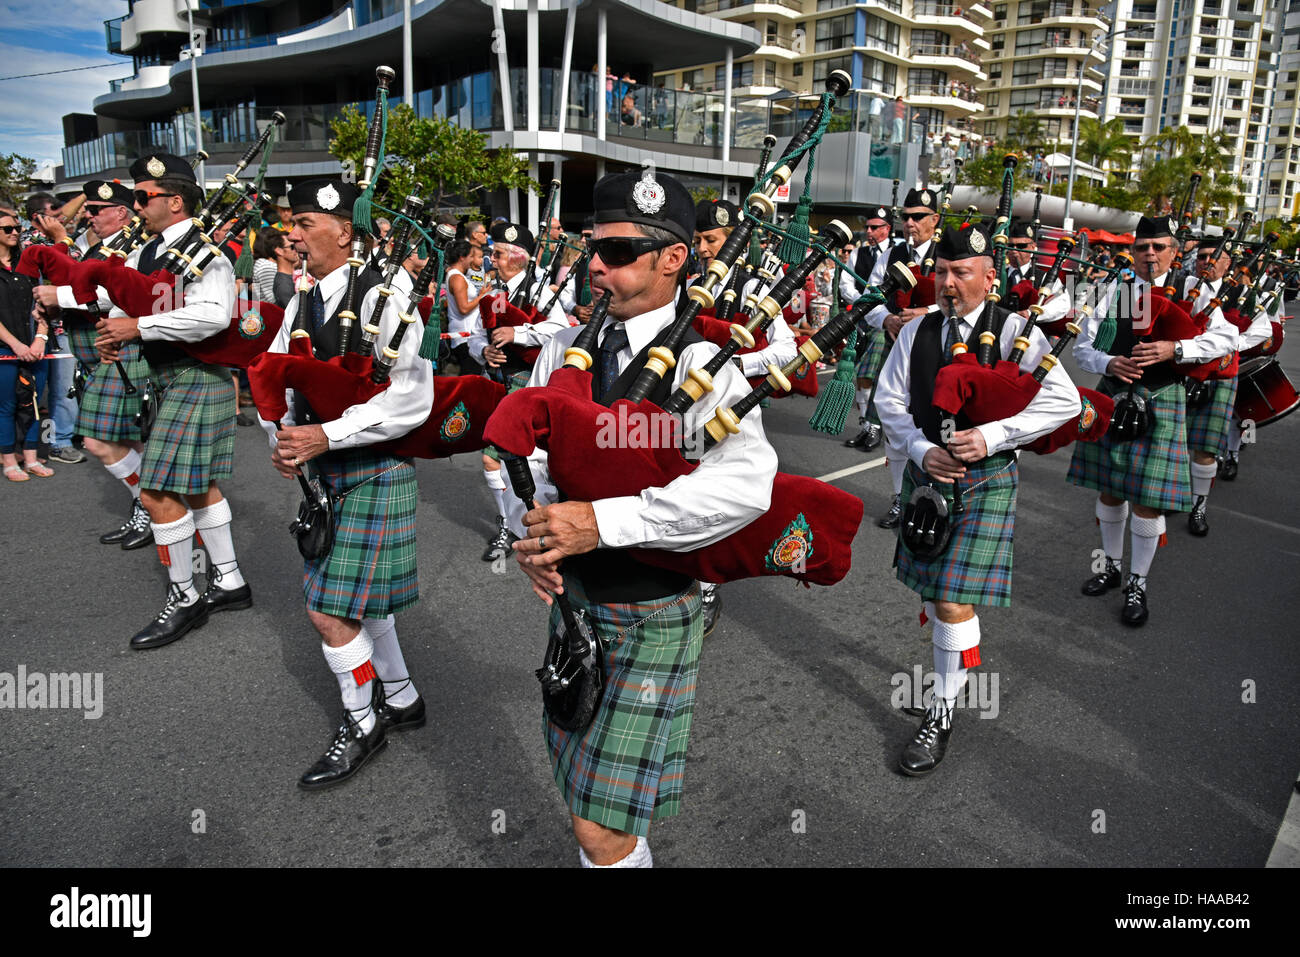 scots bagpipe band in cooly rocks on retro parade at coolangatta gold coast queensland australia Stock Photo